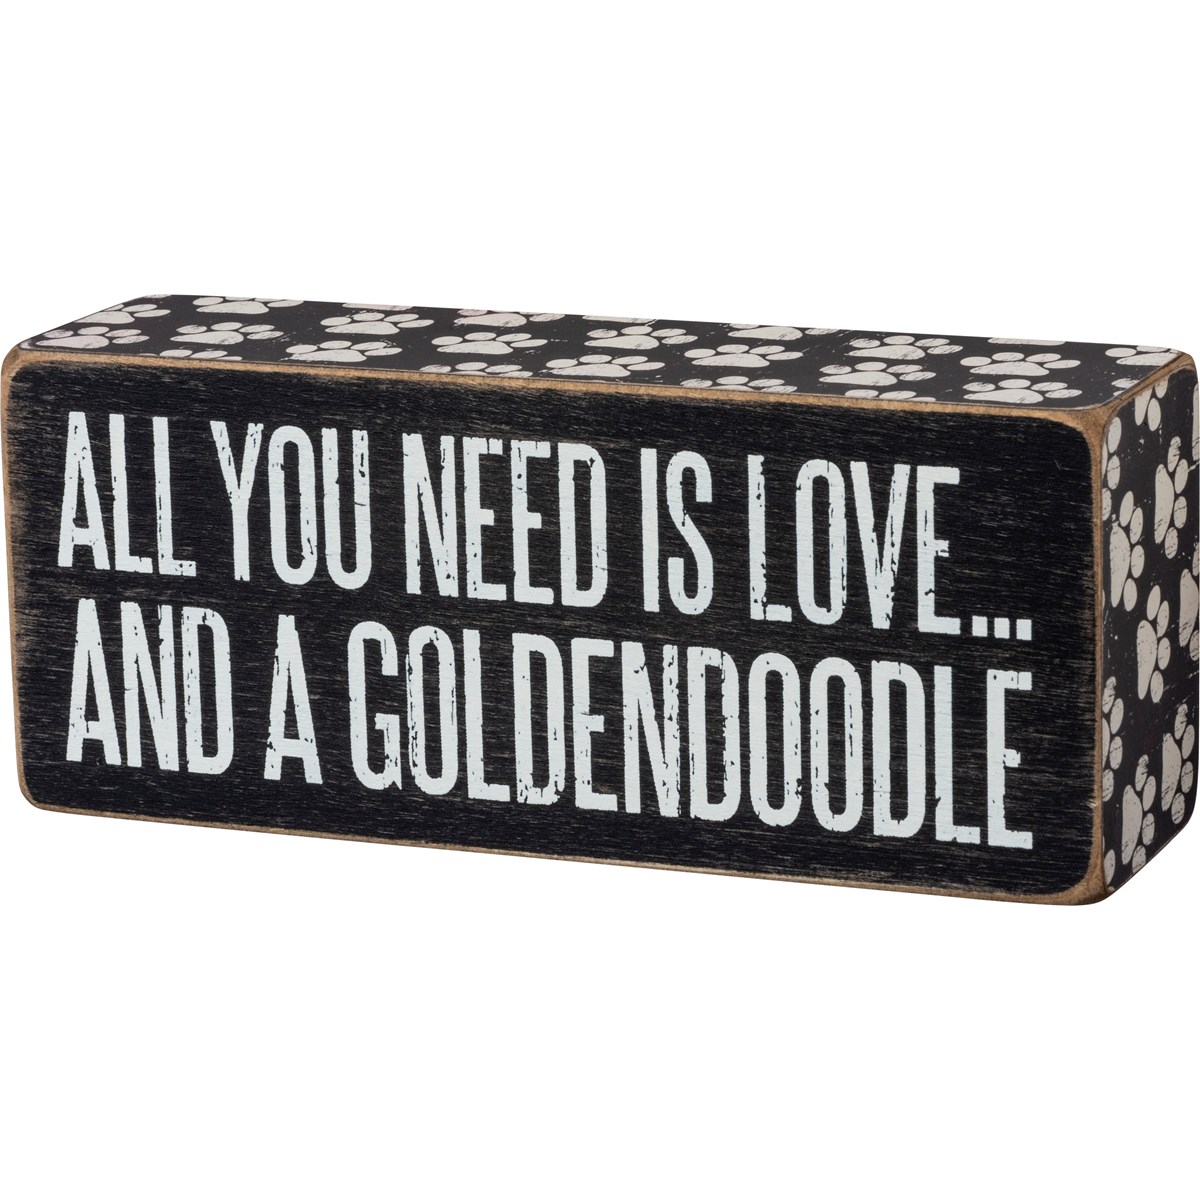 All You Need Is Love And A Goldendoodle Box Sign - Wood